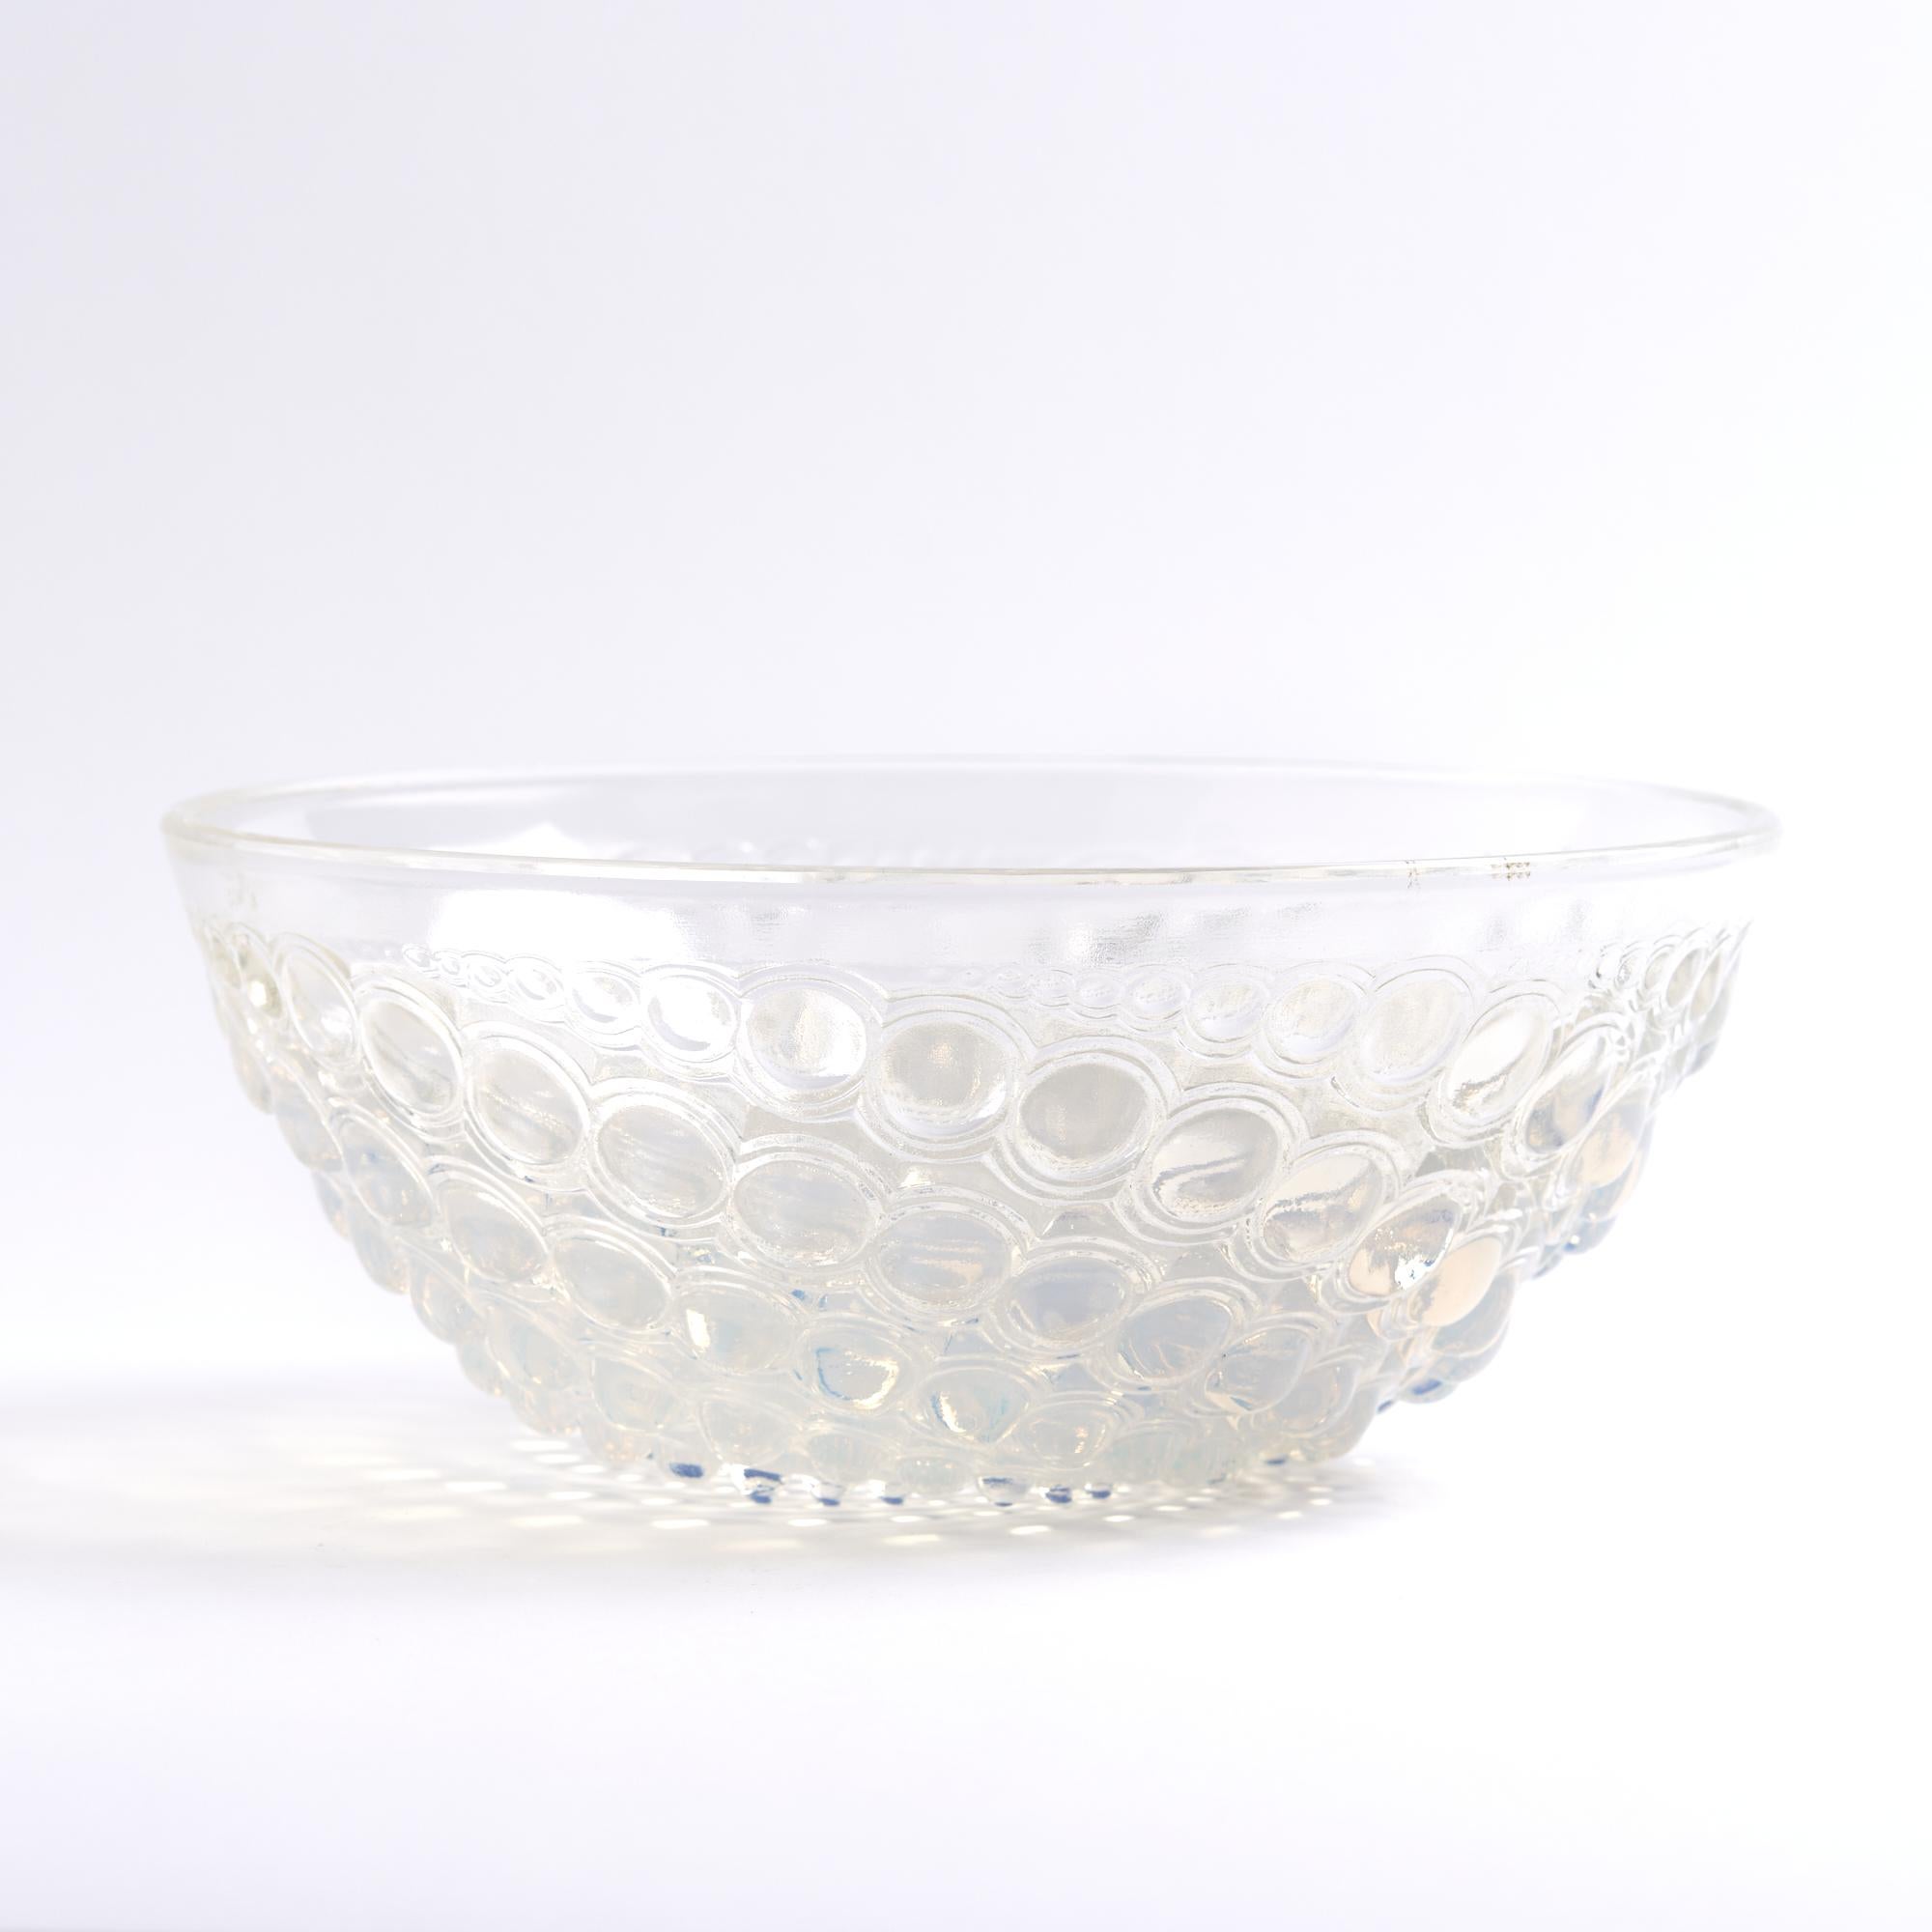 Lalique Volutes Opalescent Glass Bowl

This plate measures: 8 wide x 8 deep x 3.25 inches high

Great Vintage Condition

We take our photos in a controlled lighting studio to show as much detail as possible. We do not photoshop out blemishes. 

We